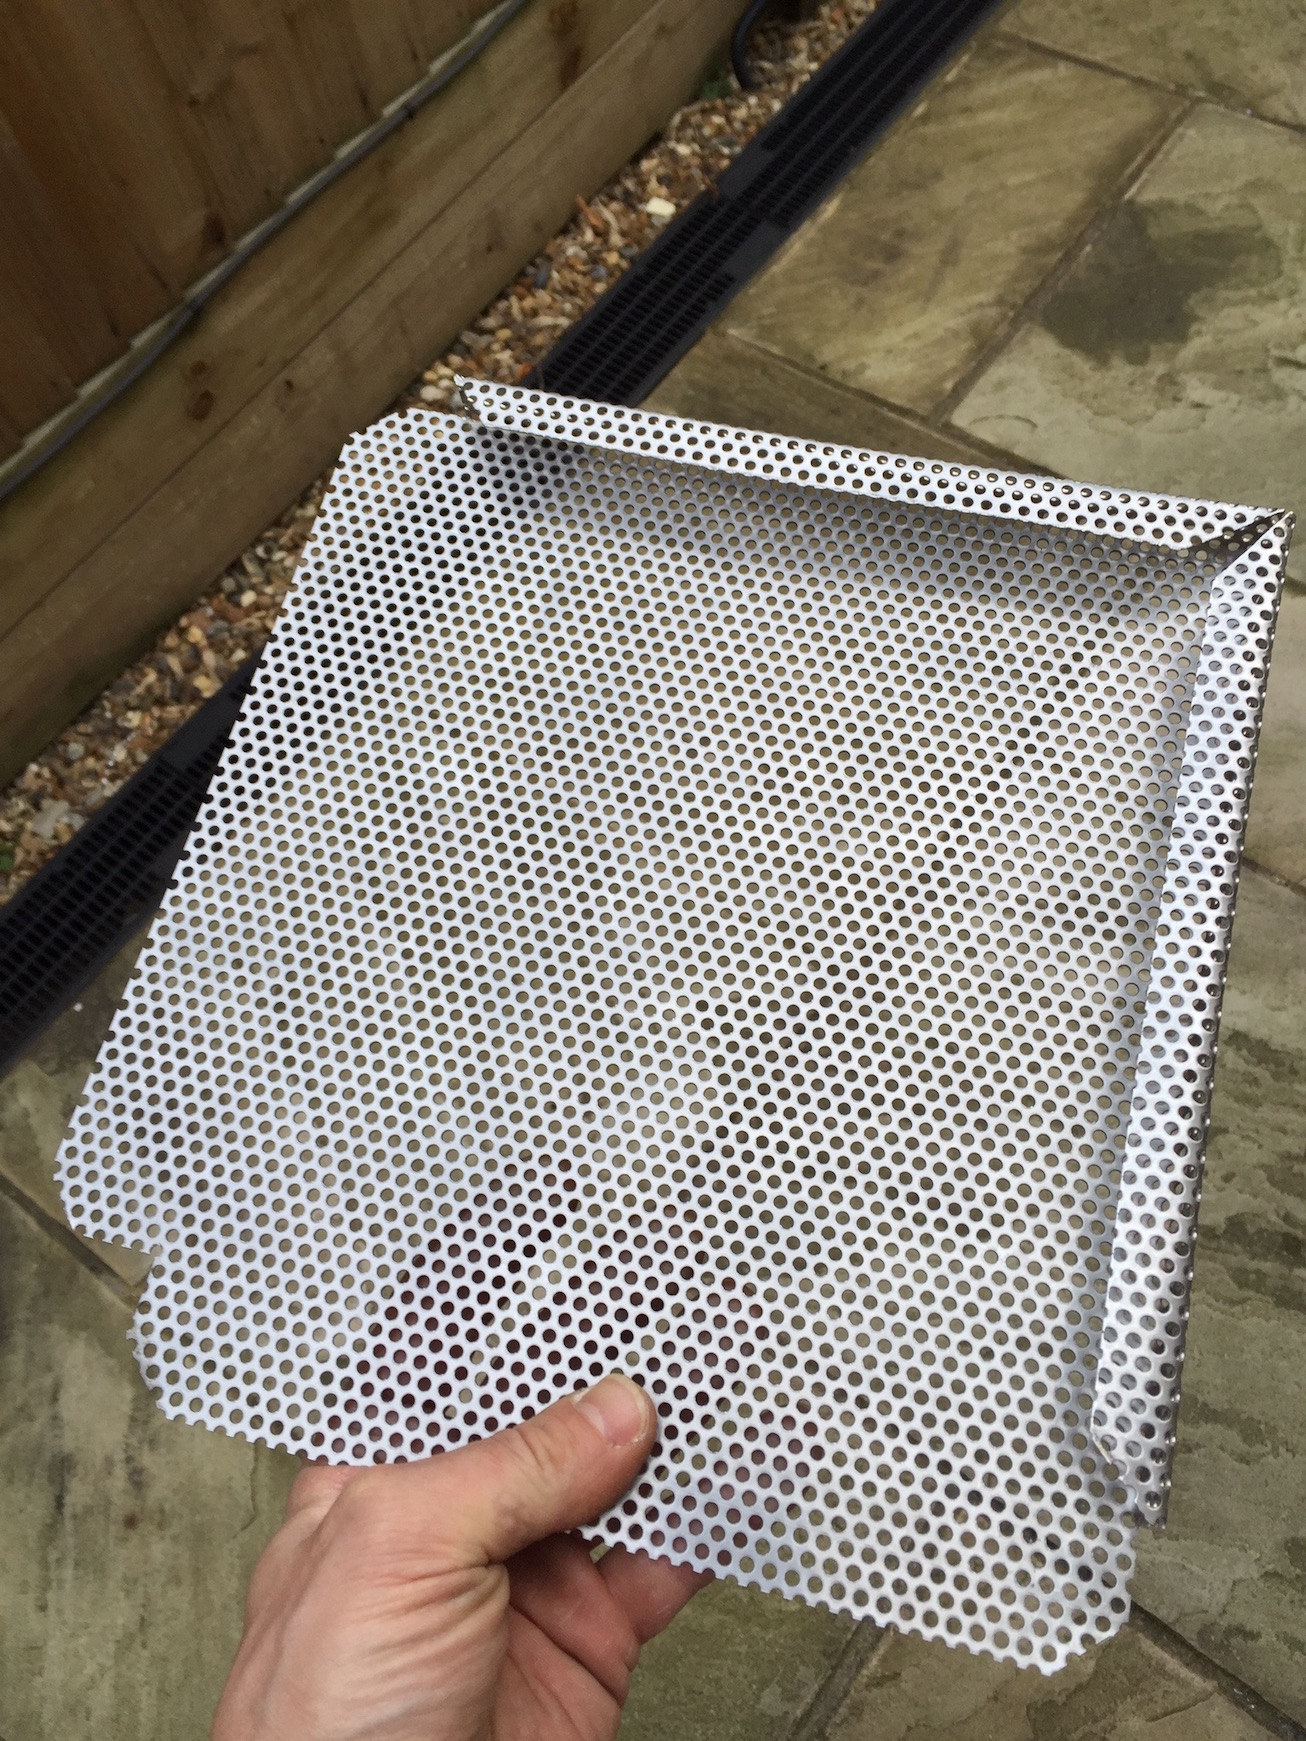 Perforated stainless steel mesh